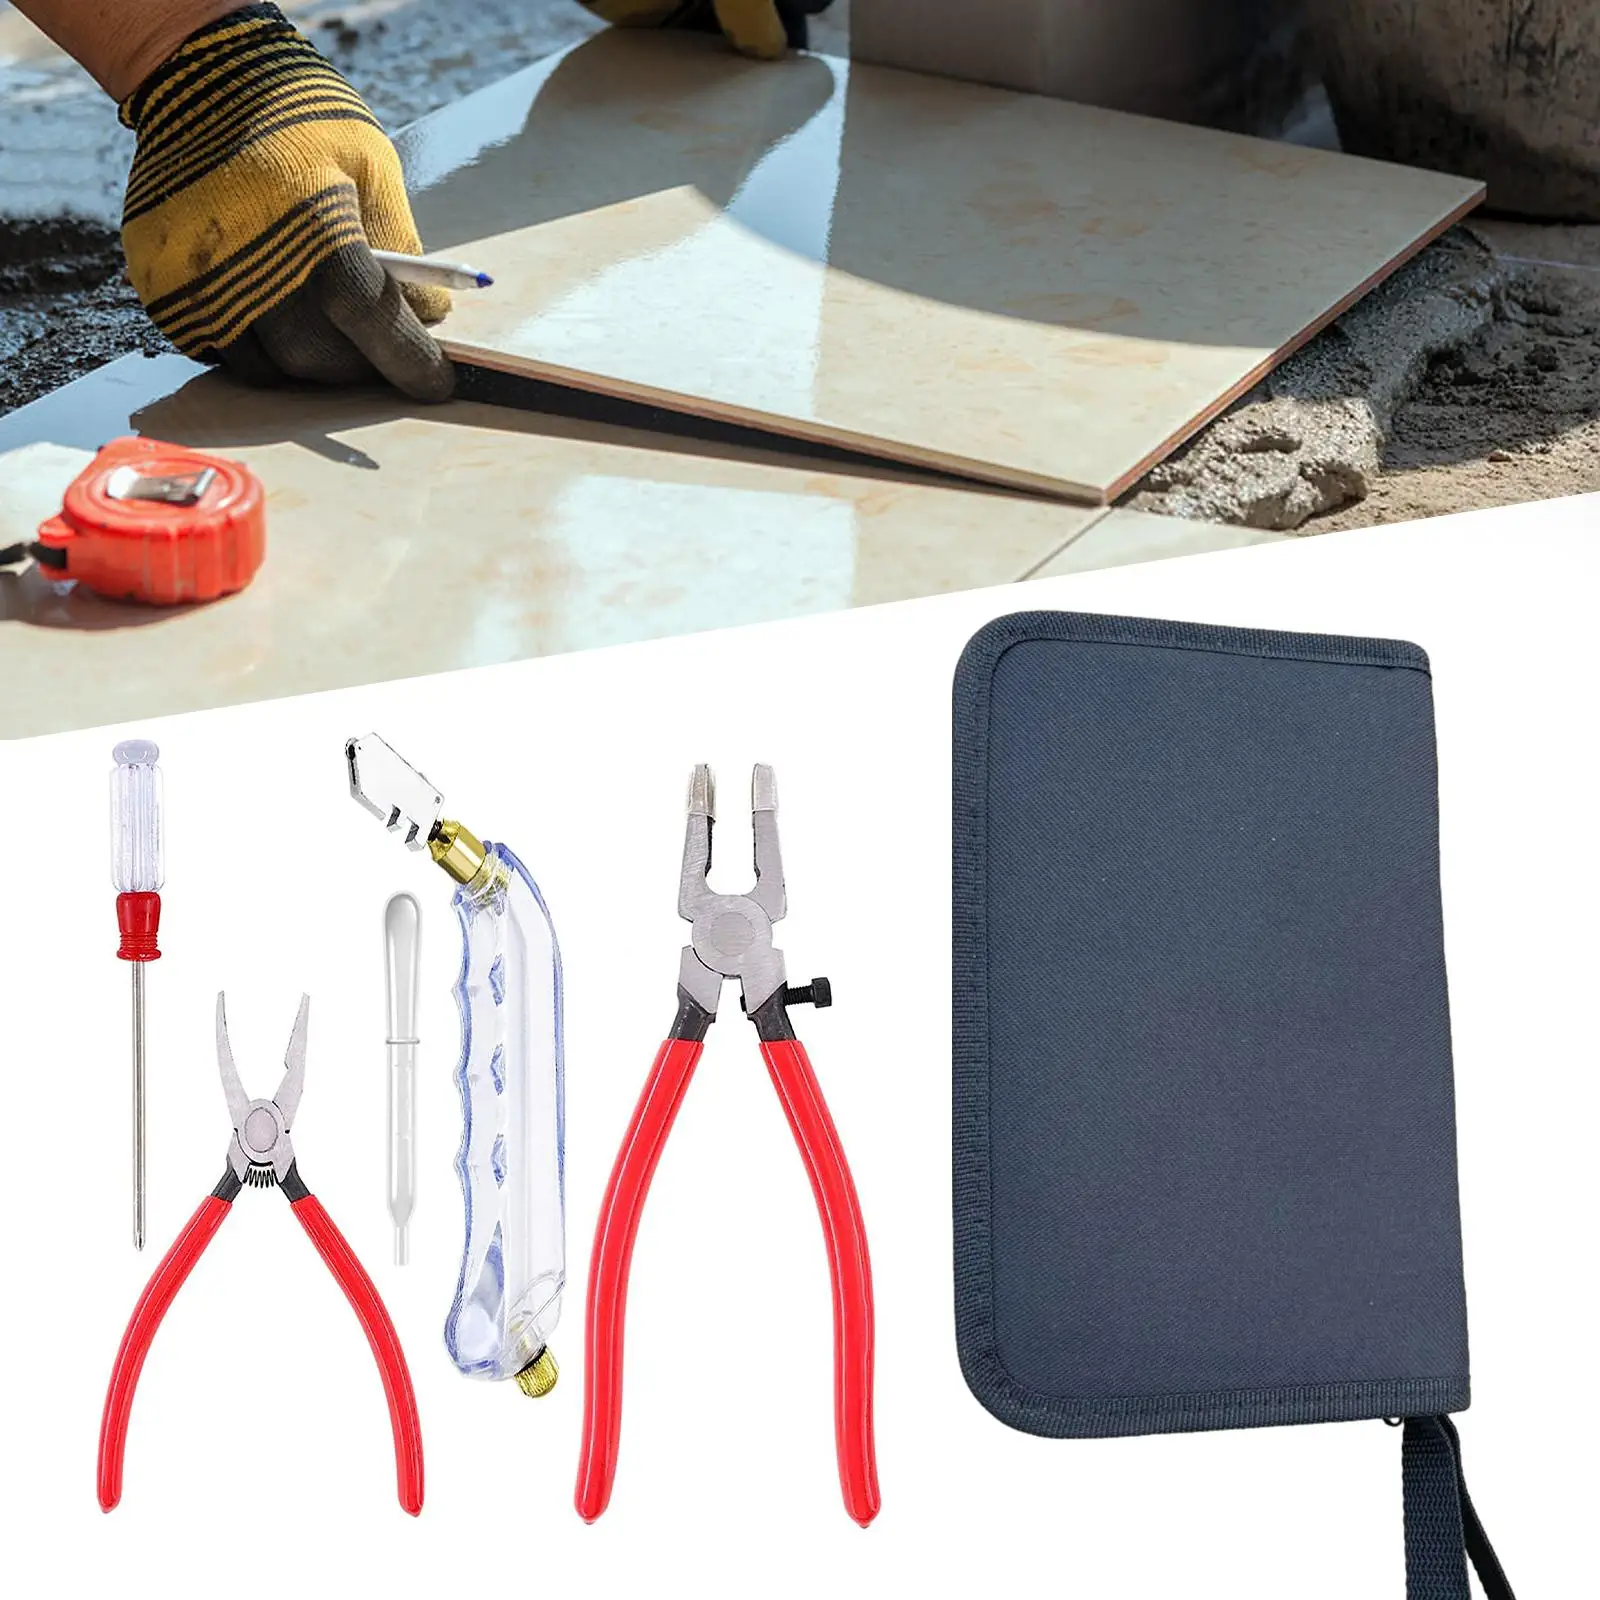 Glass Cutting Tools with Storage Bag Nippers Glass Cutter Tool Kit for Fusing Thick Glass Breaking Mosaics Tiles